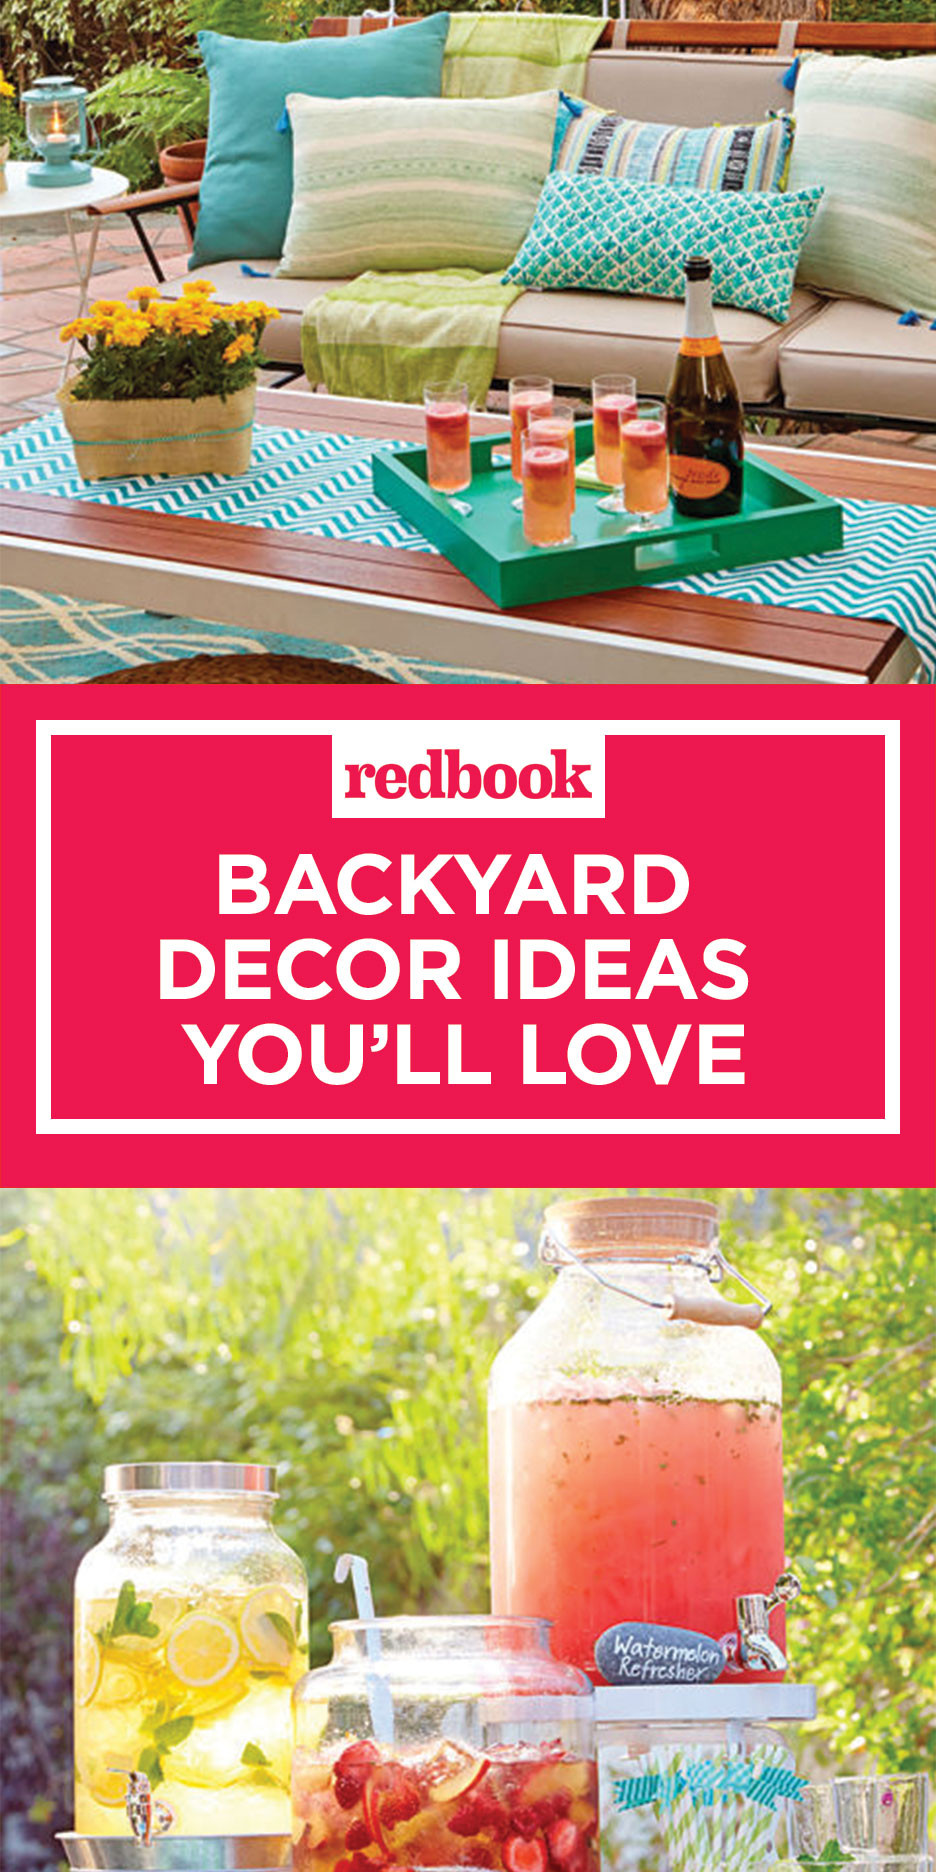 Outdoor Summer Birthday Party Ideas
 14 Best Backyard Party Ideas for Adults Summer